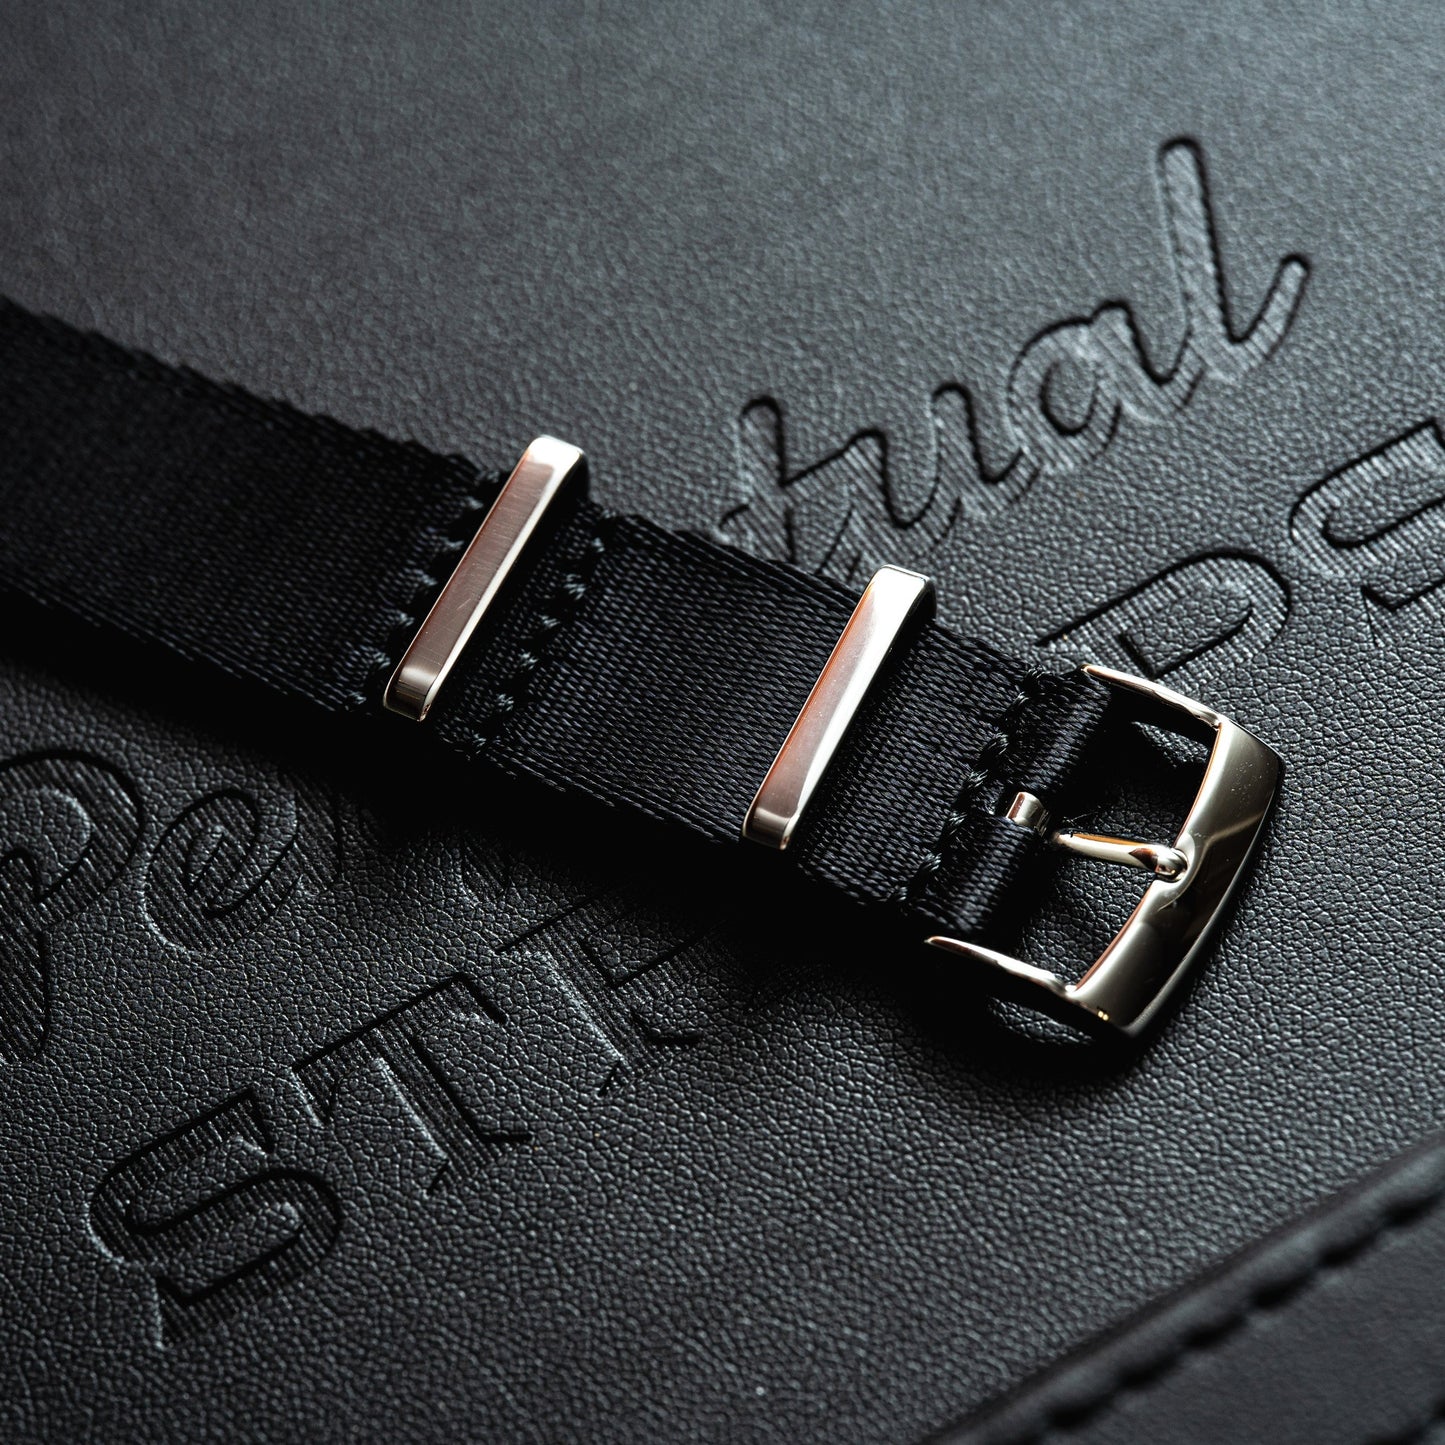 BLACK NYLON - PREMIUM FABRIC WATCH STRAP for MOST WATCHES WITH A 20MM LUG WIDTH